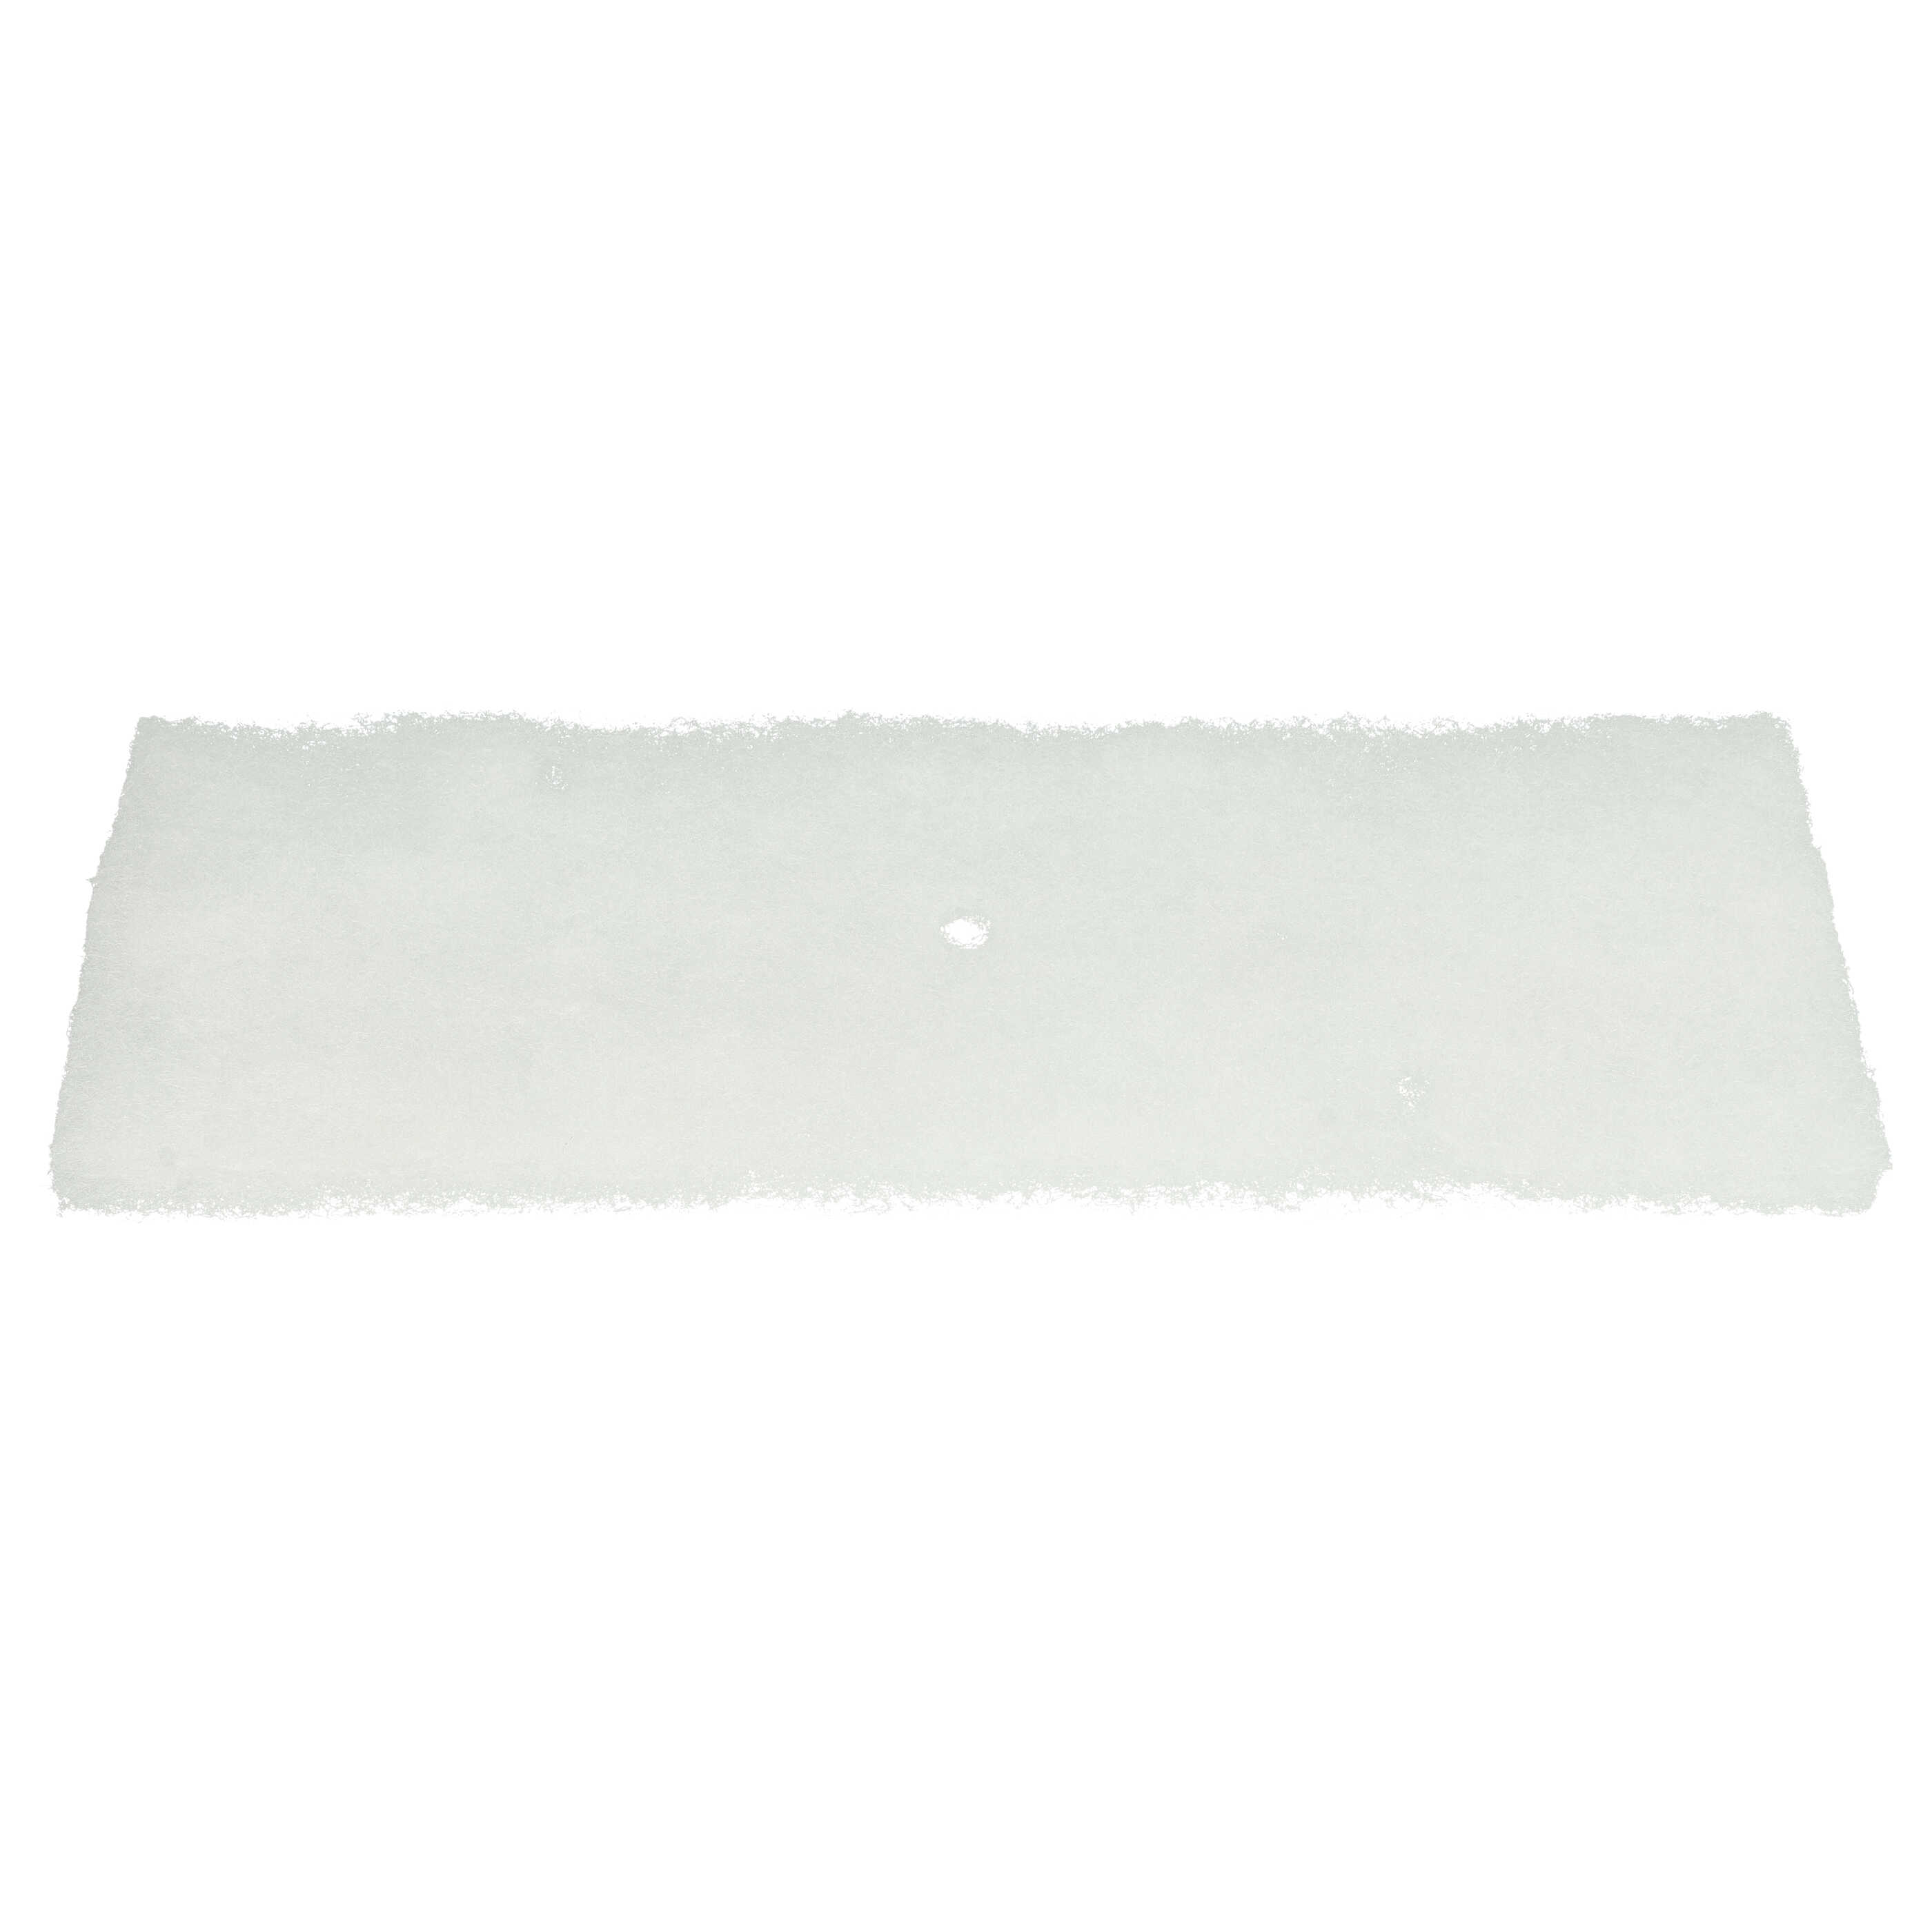 Fine filter as Replacement for Panasonic ANH300-4871, ANH300-4870 Tumble Dryer